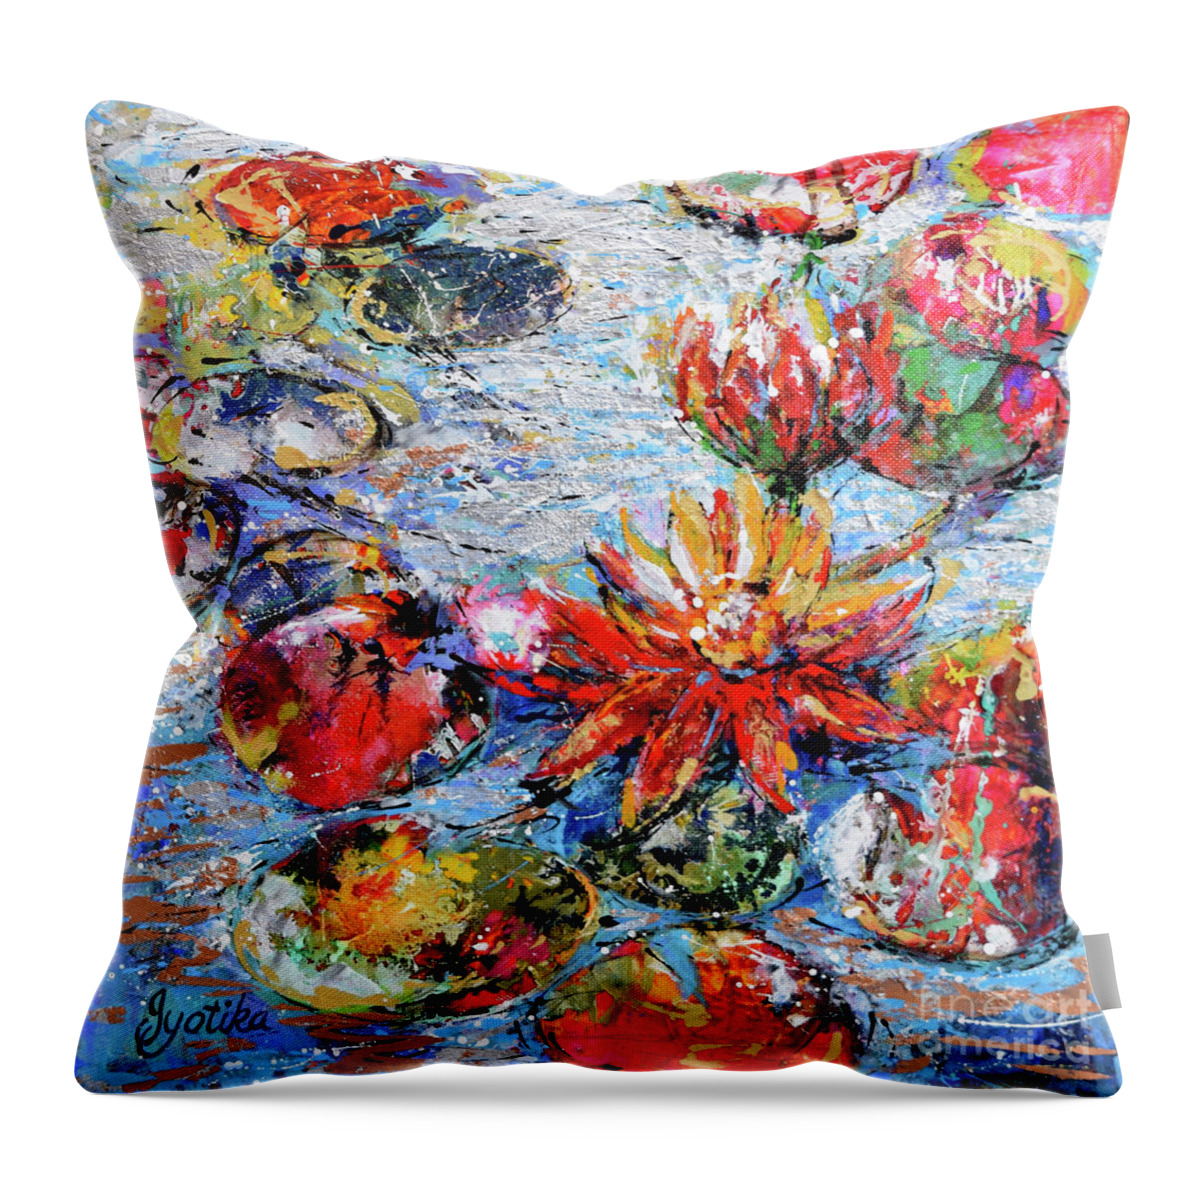  Throw Pillow featuring the painting Waterlilly by Jyotika Shroff